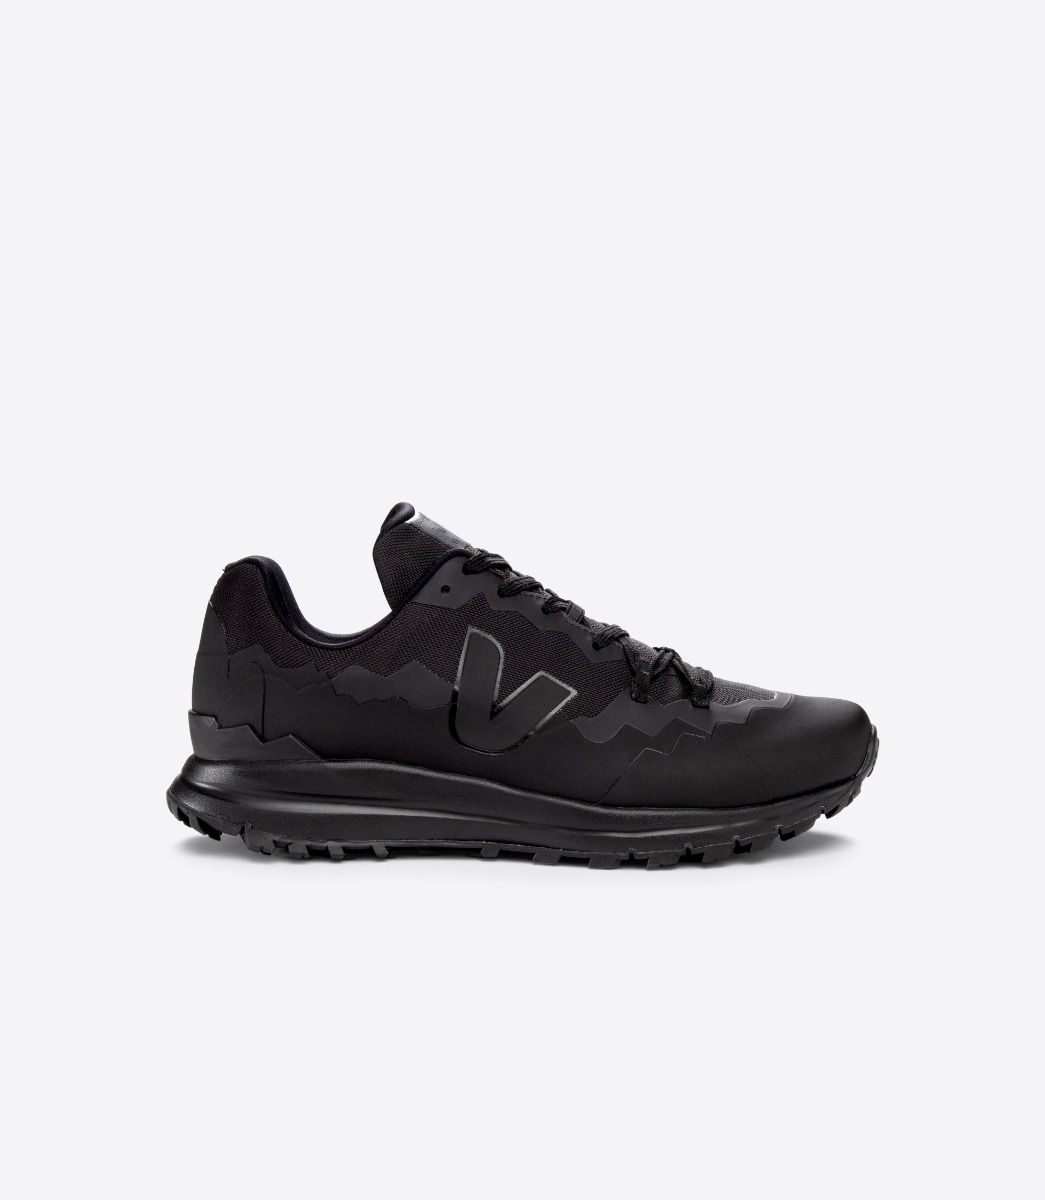 Lateral view of Men's Fitz Roy Trek shell trail shoes by VEJA in all black